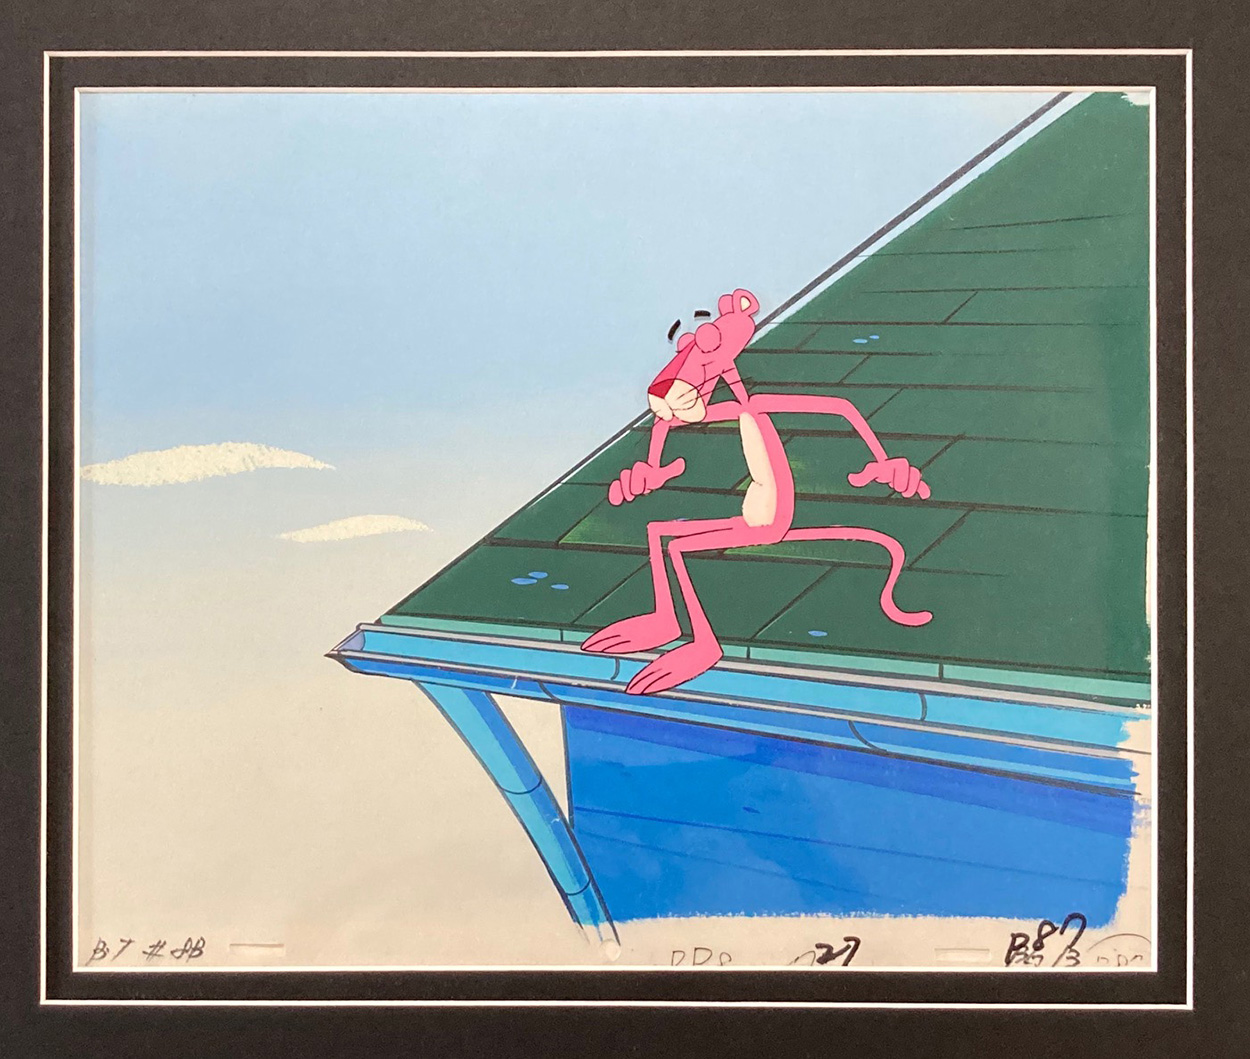 The Pink Panther - Animation Cel and Background (Original) art by MGM Studio at The Illustration Art Gallery